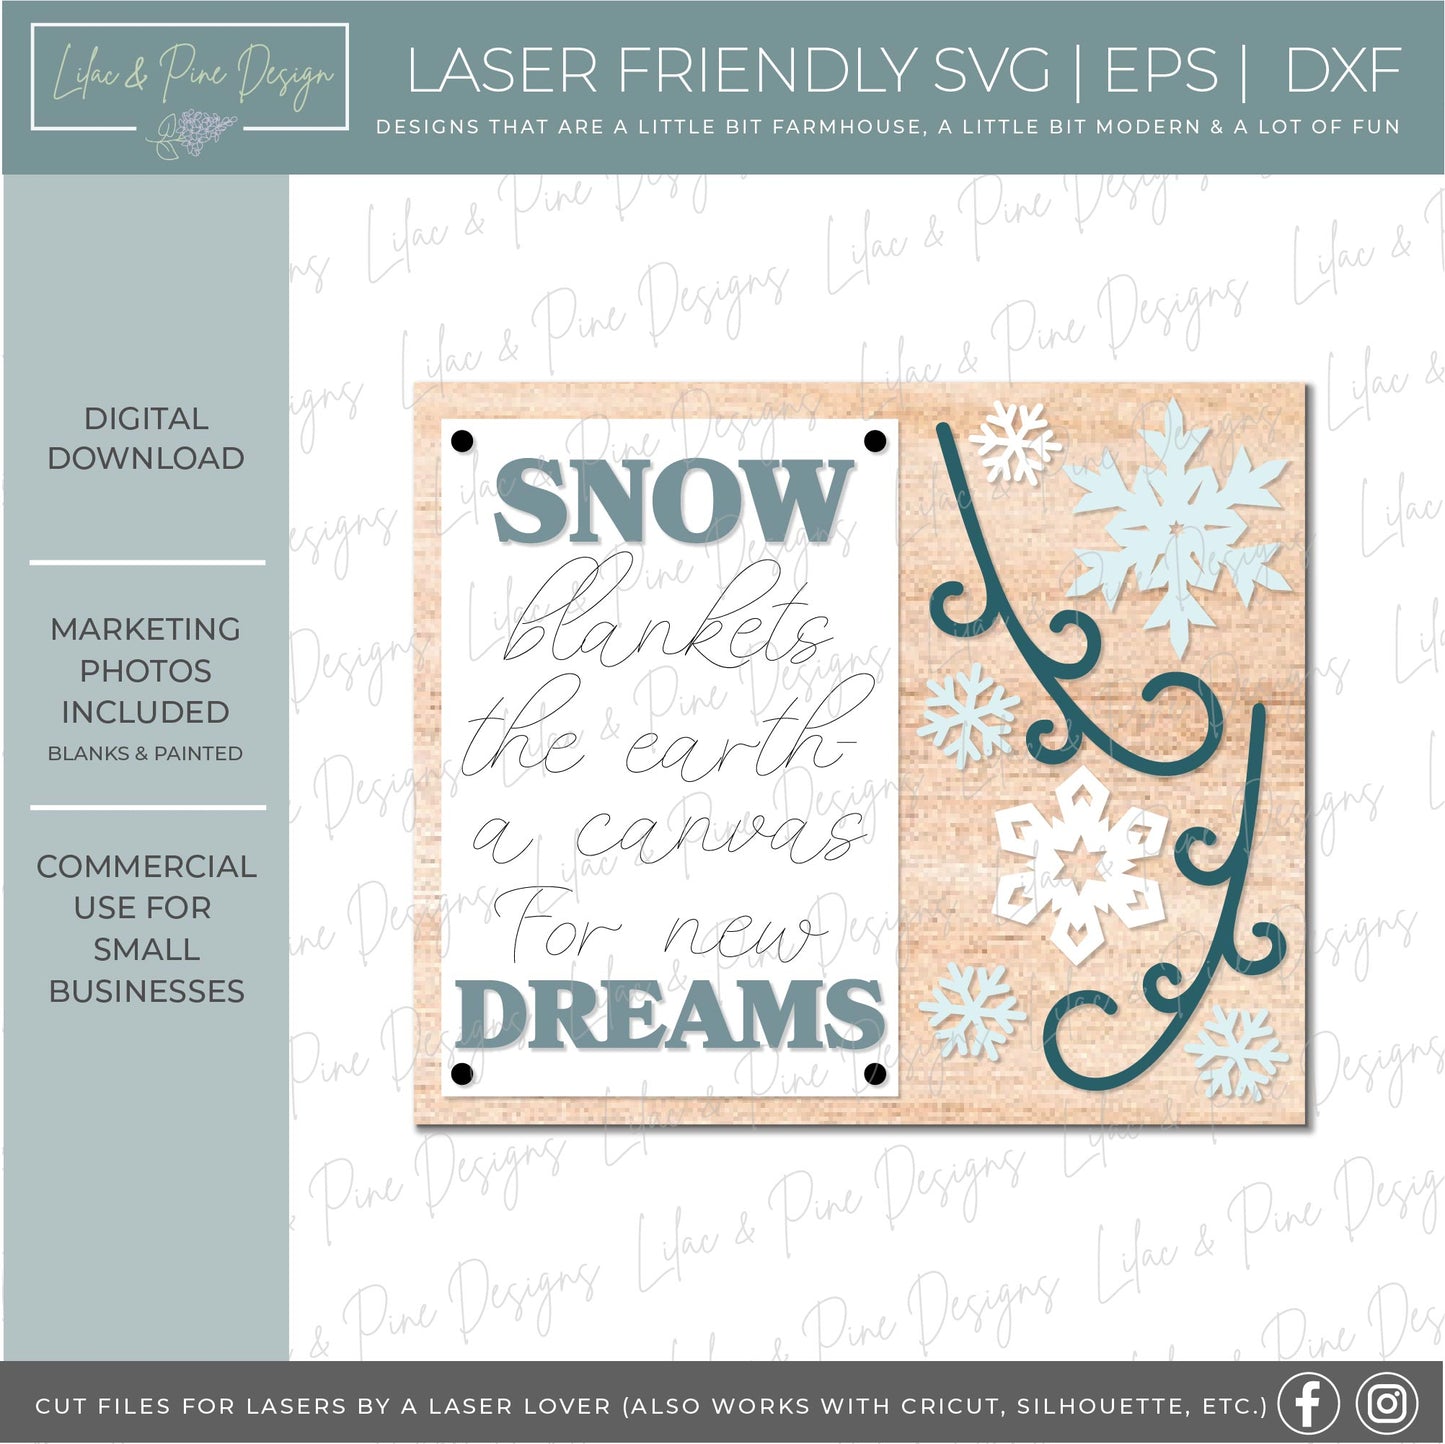 Snow sign SVG - Winter quote sign SVG - New Year New Dreams SVG